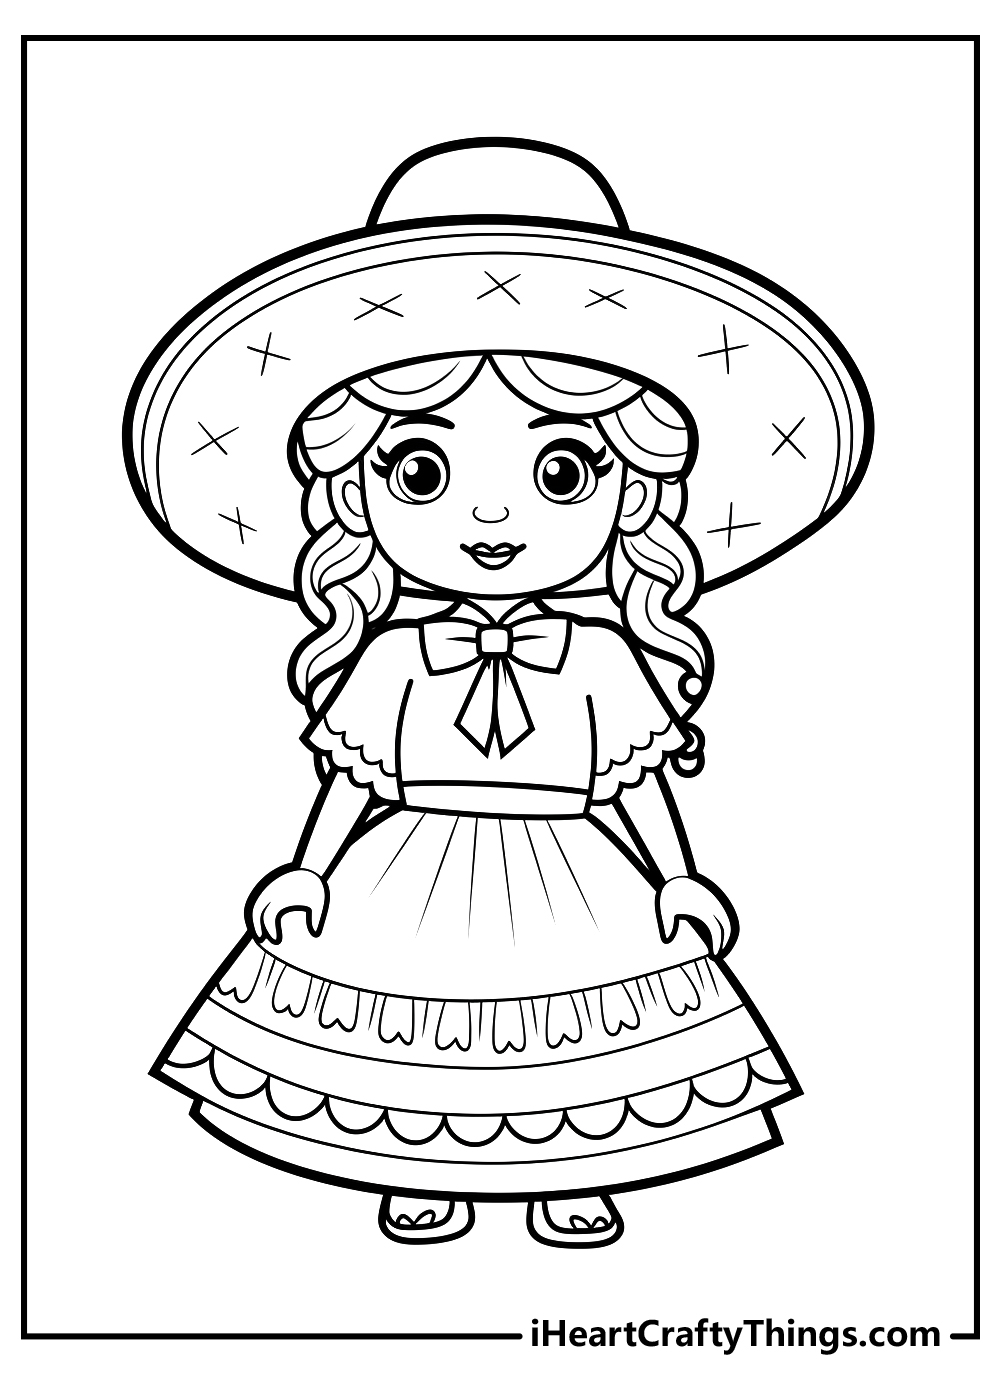 mexican girl coloring pages